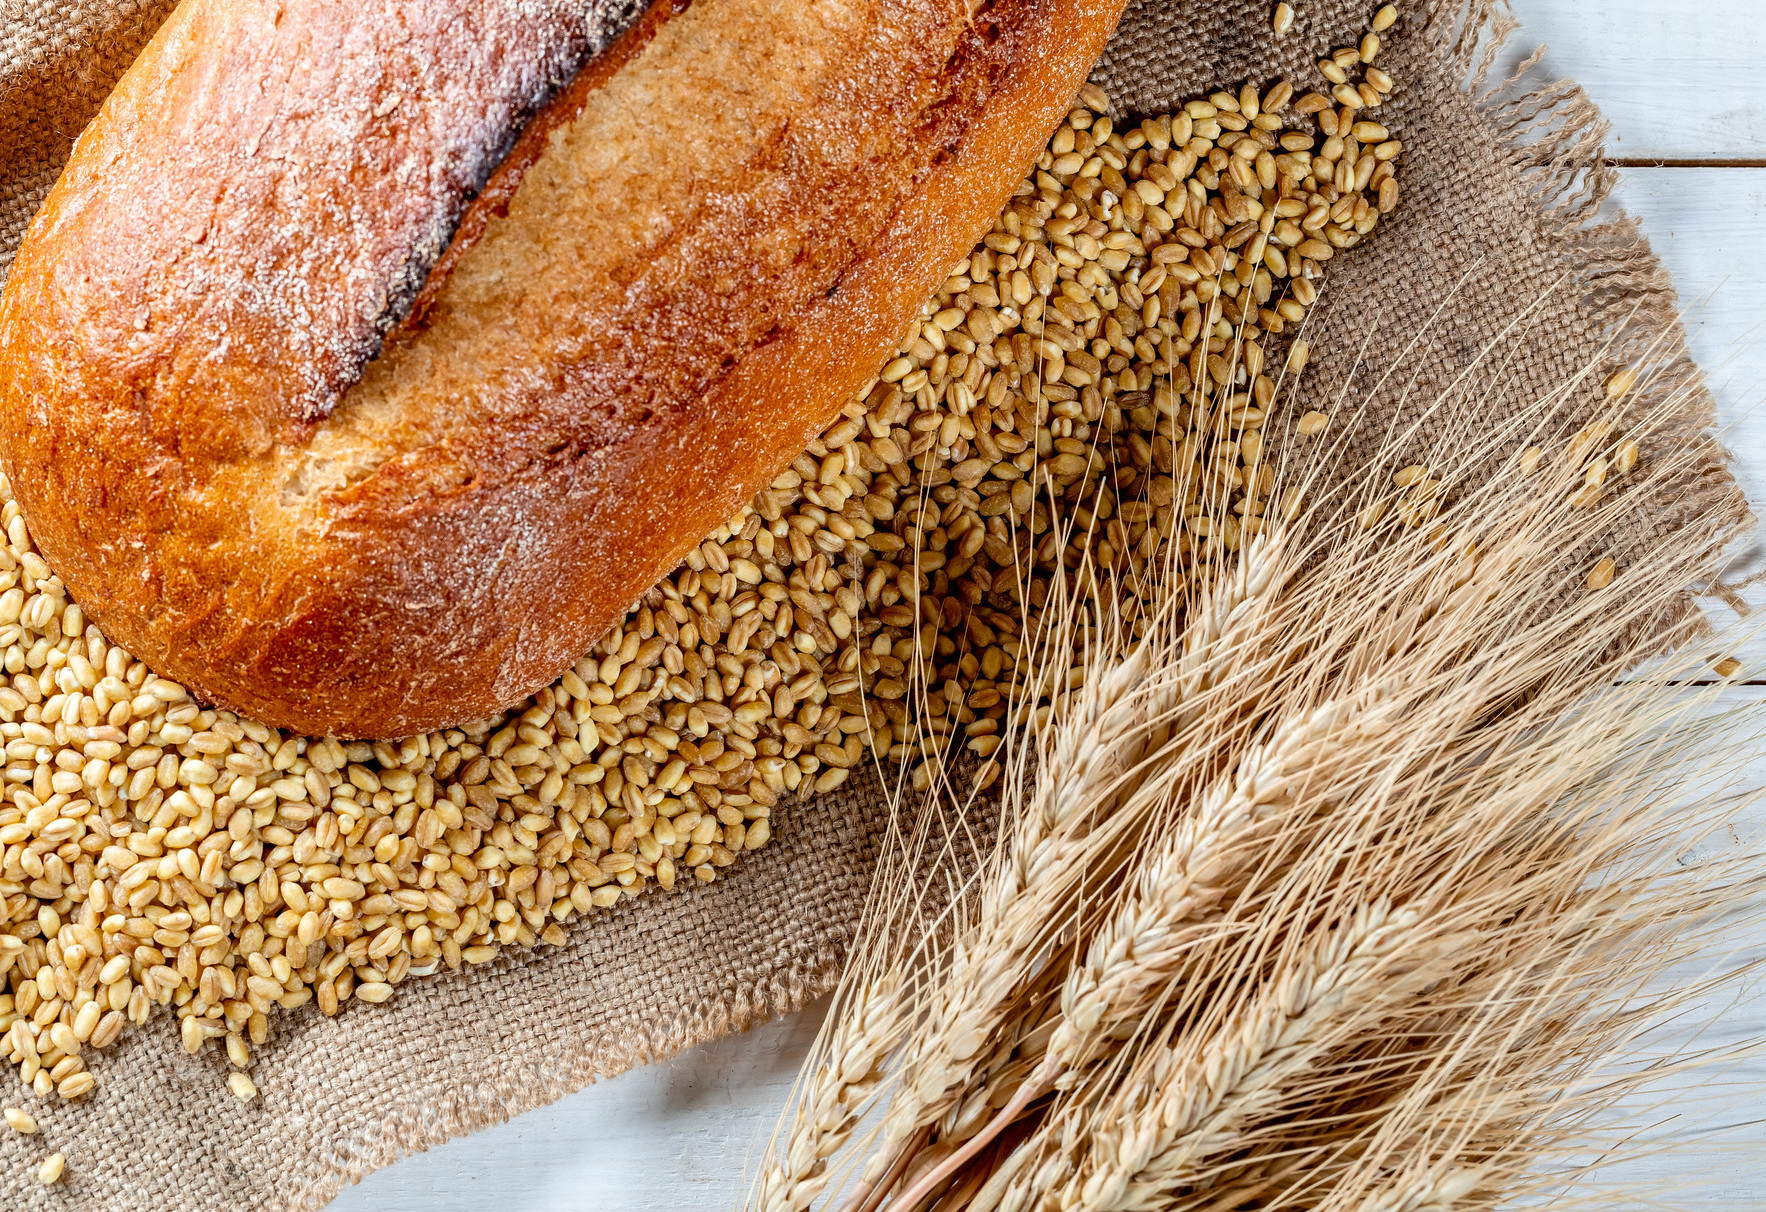 Freshly baked rye bread is displayed next to wheat spikes and grains. (Photo: Marco Verch/Flickr)